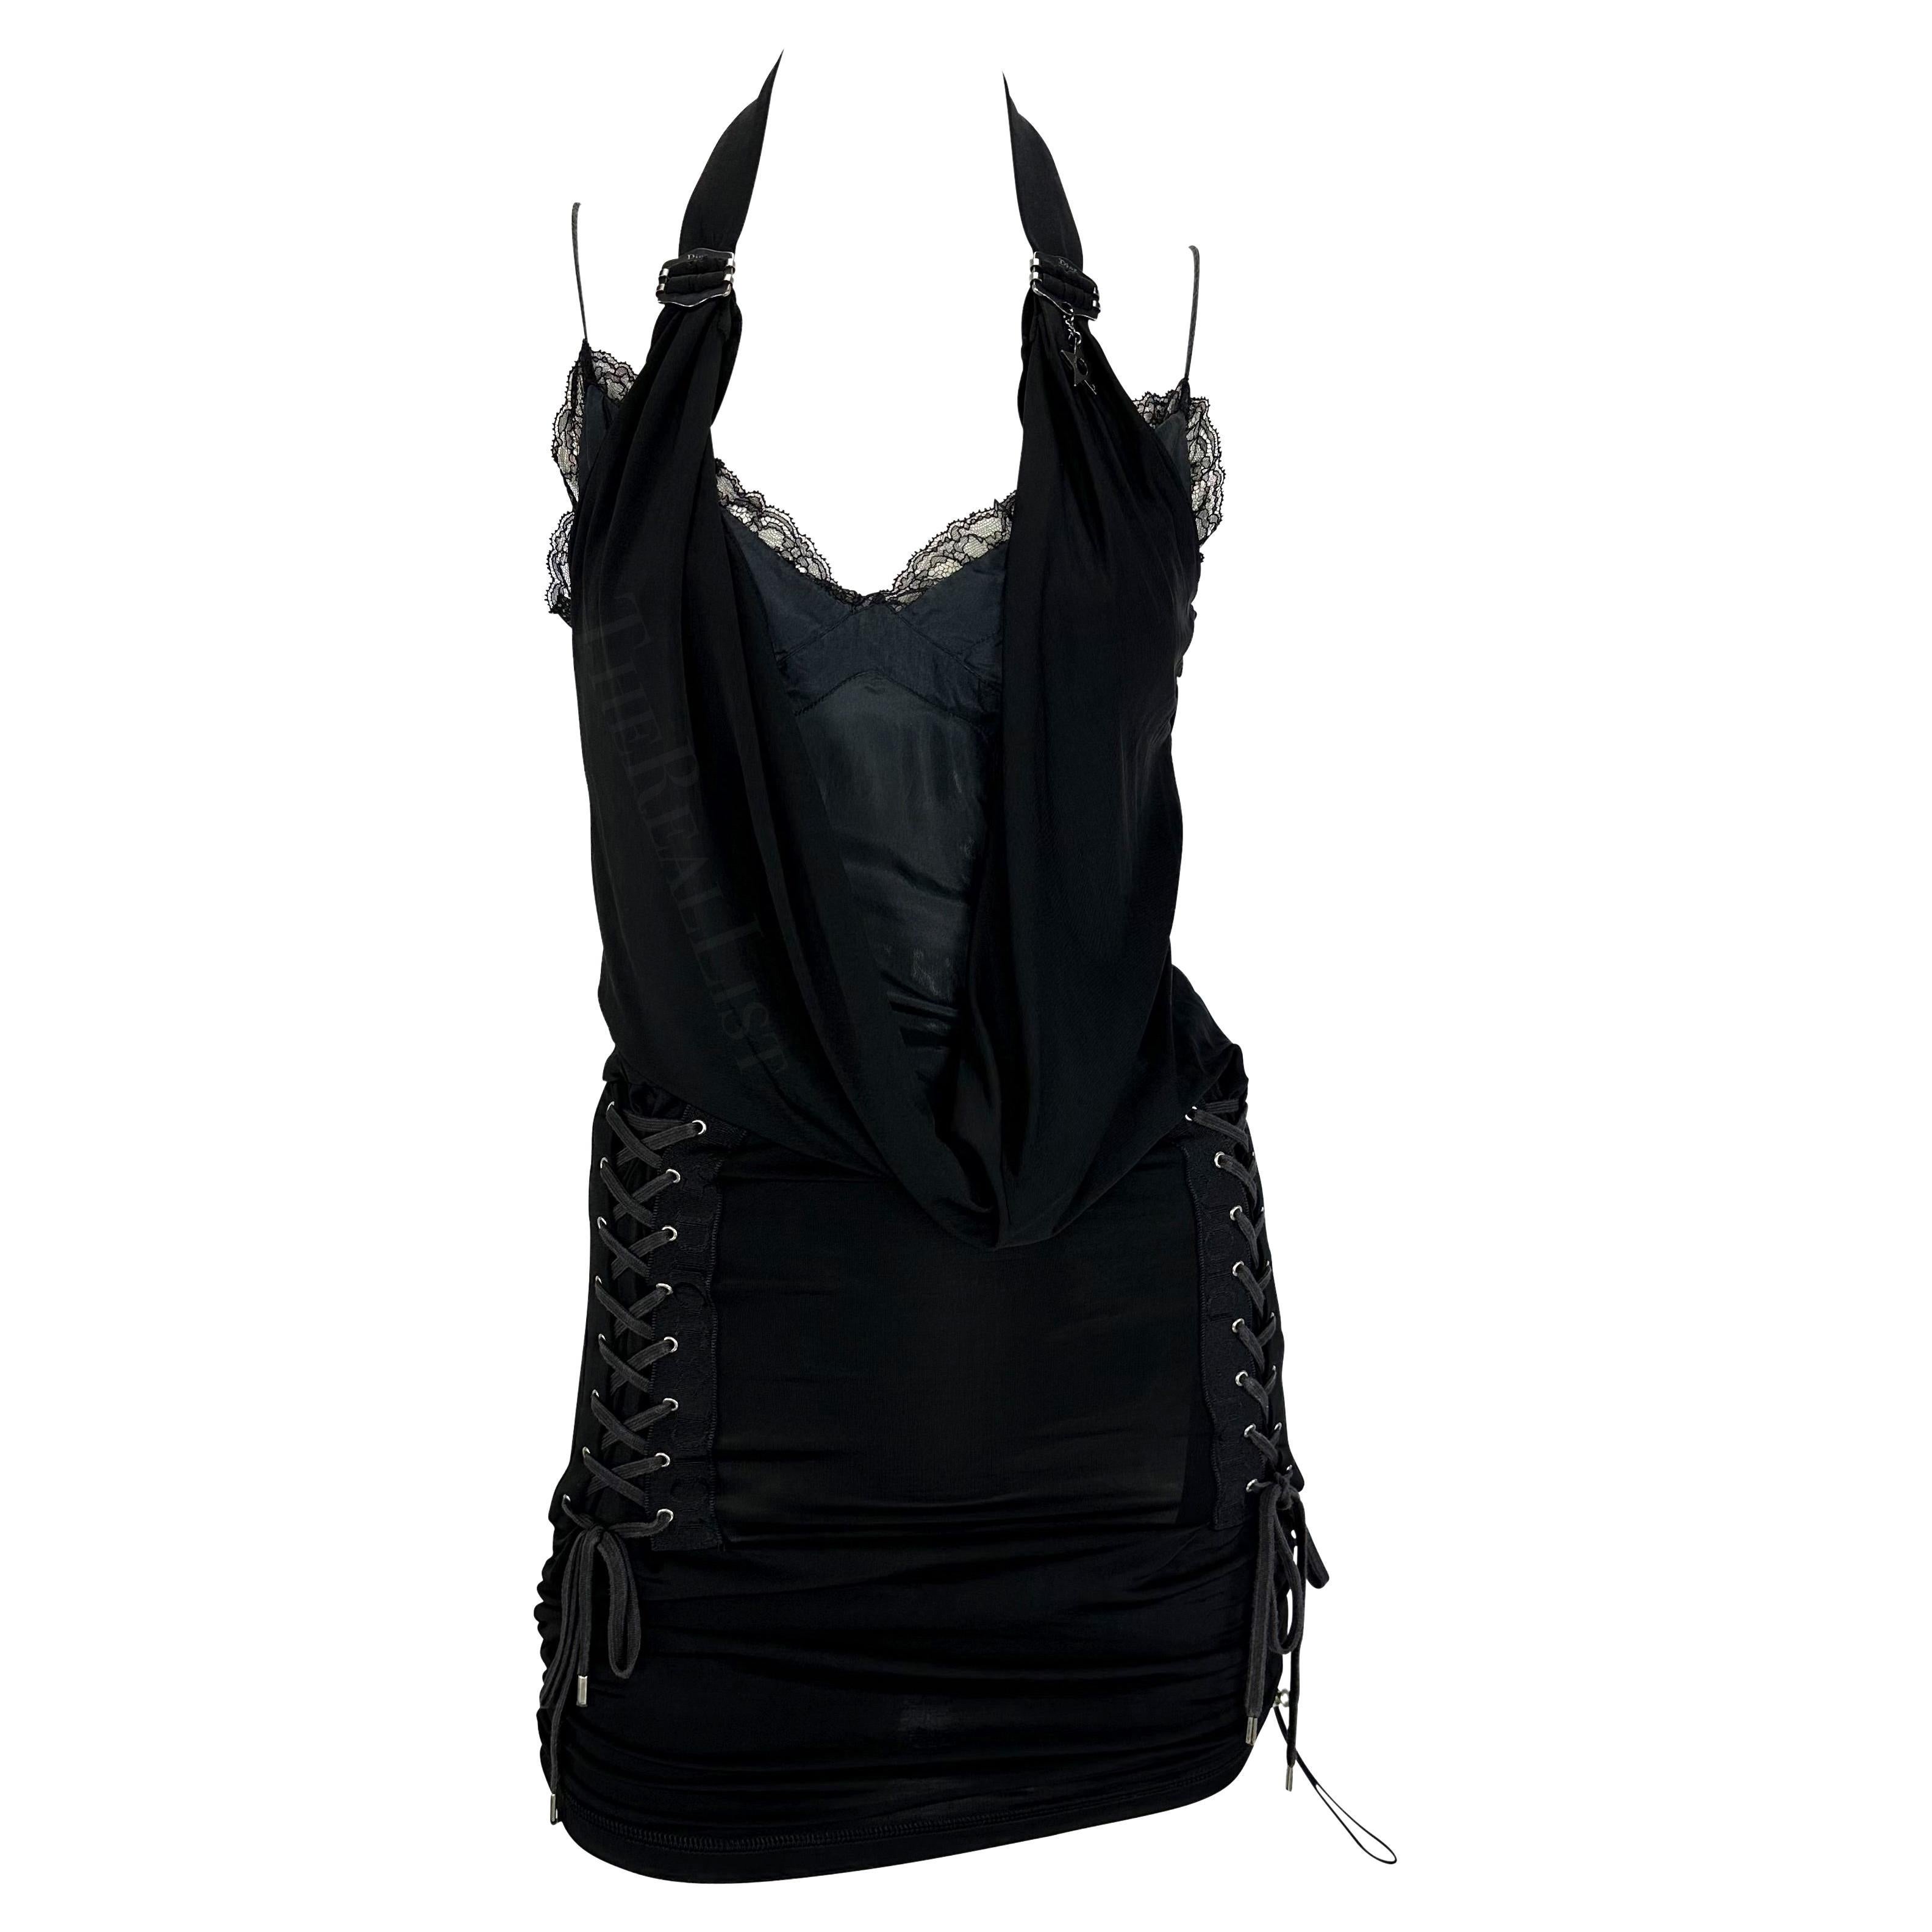 S/S 2004 Christian Dior by John Galliano Lace Up Cowl Halter Black Bodycon Dress For Sale